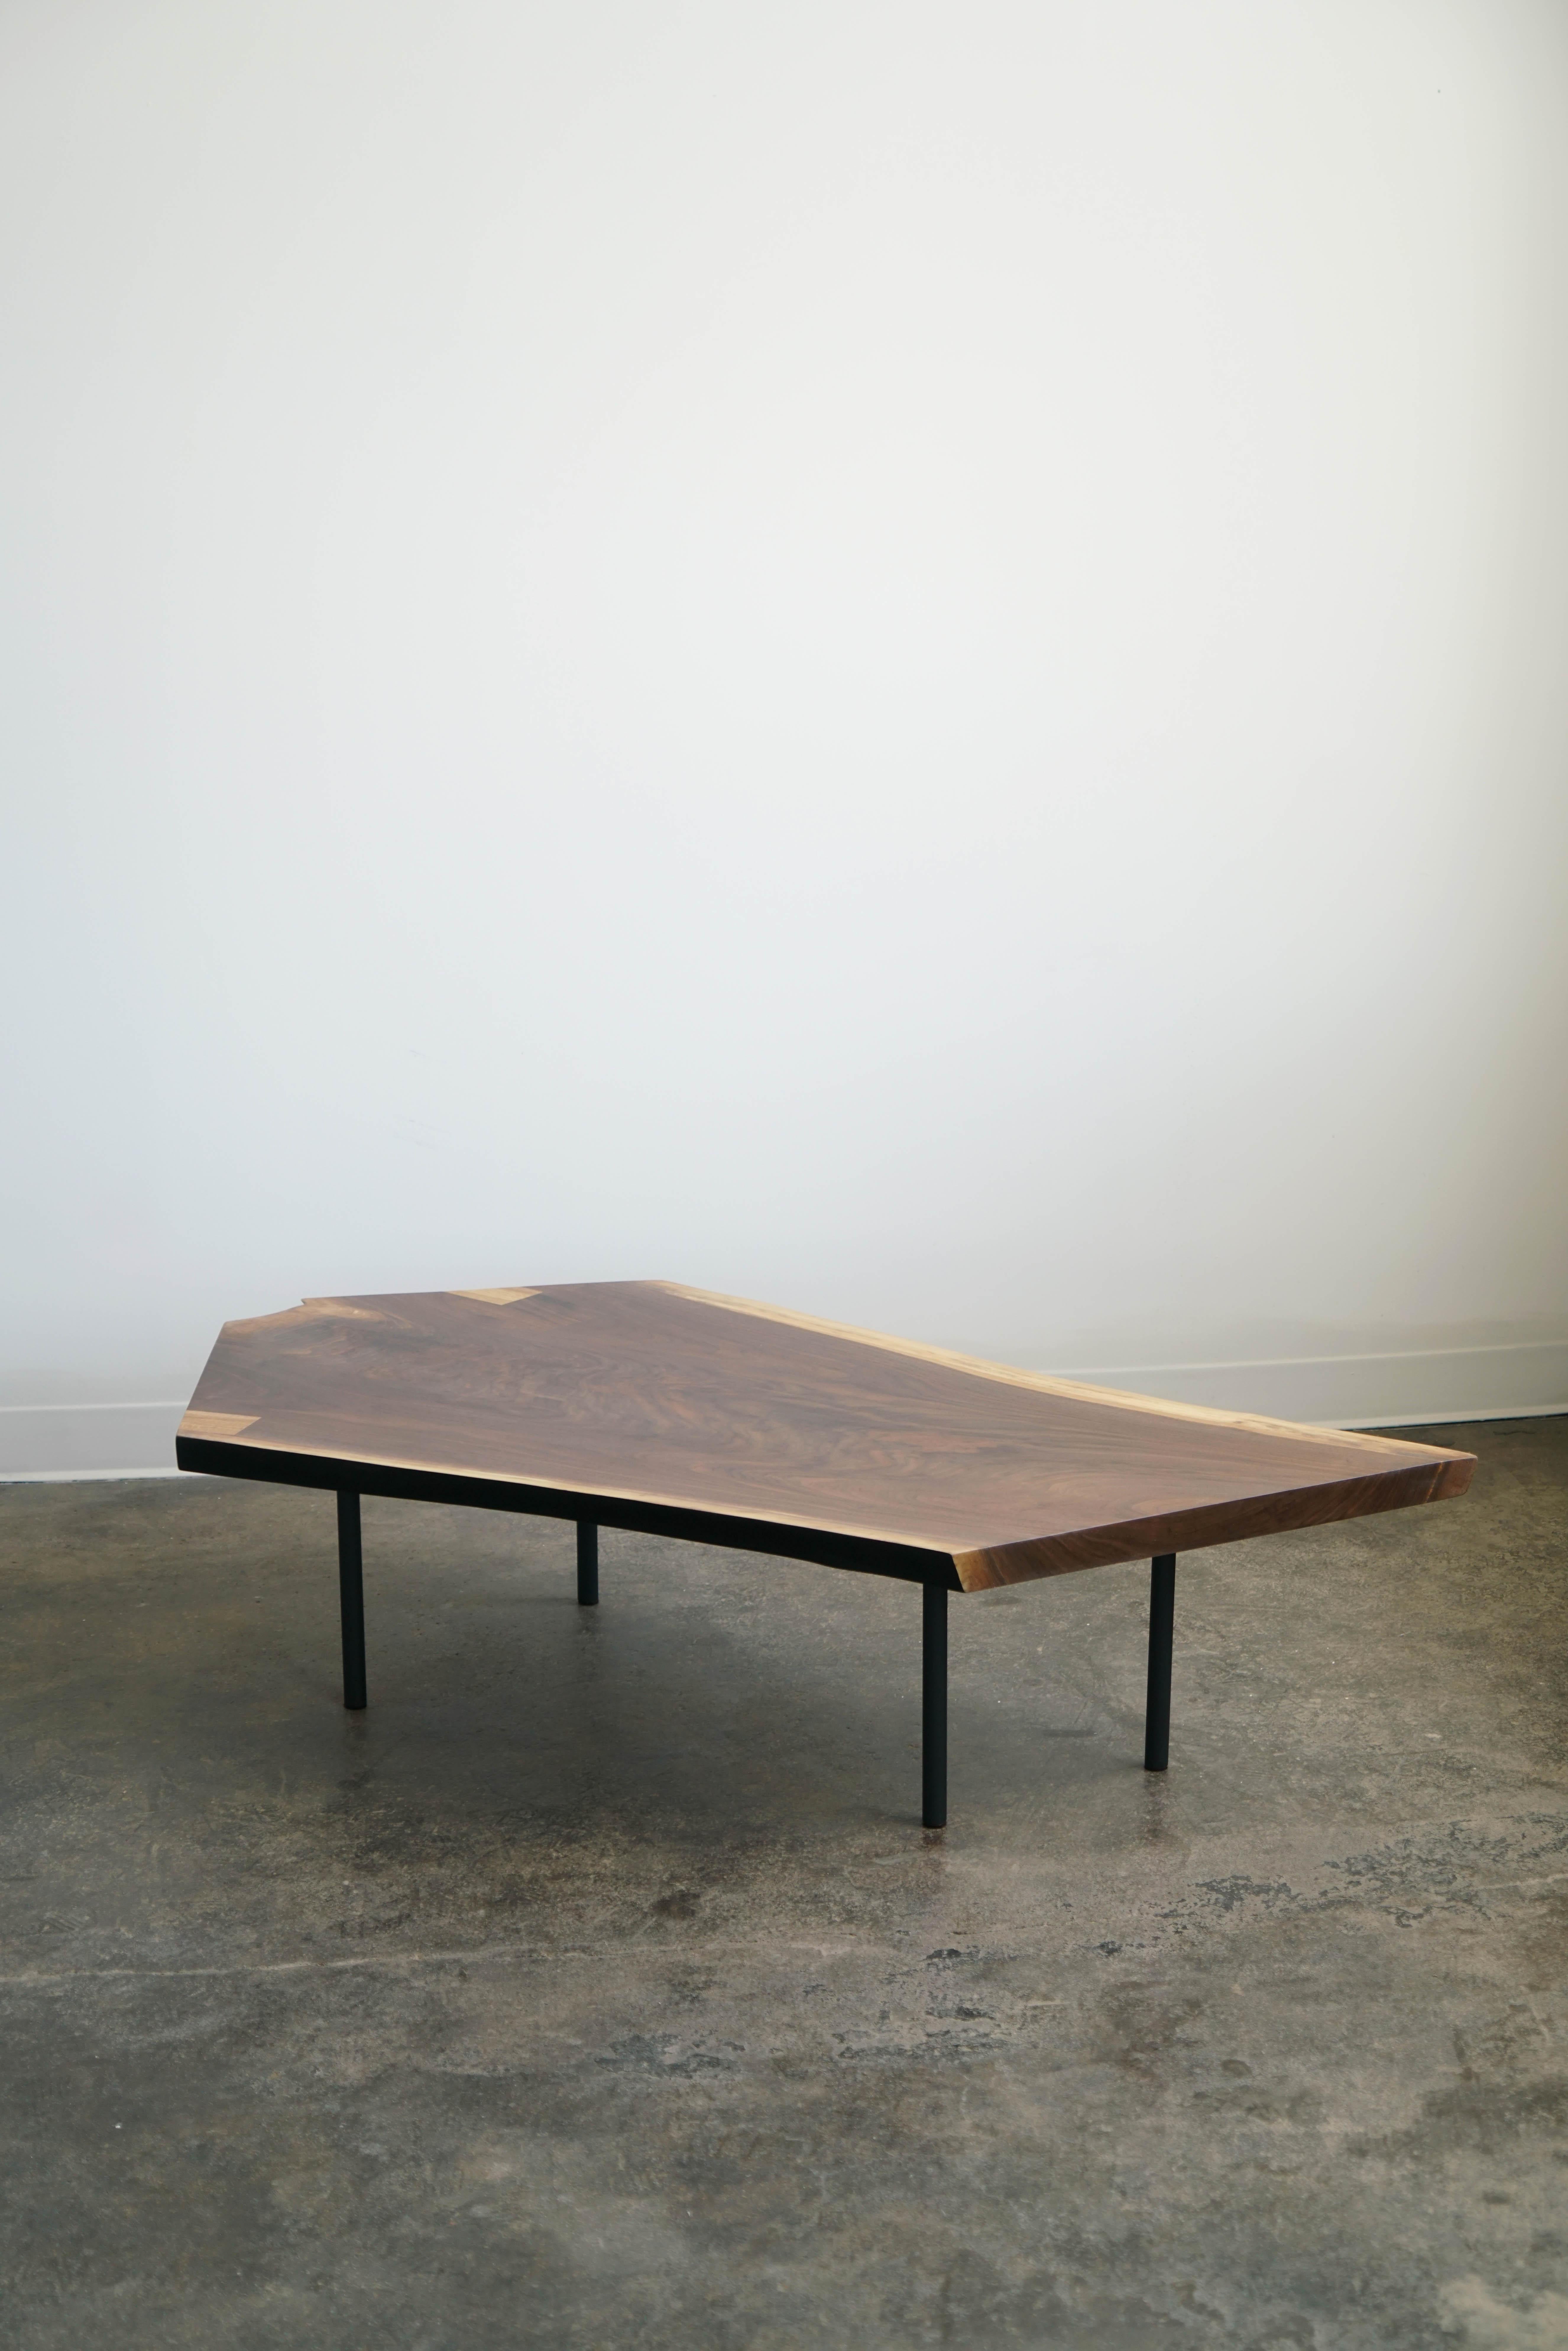 One-off walnut slab coffee table in a natural finish by Last Workshop.

New. Made in 2021 in Chicago, IL. 

Dimensions: 57” x 32” x 14”H

Four black steel legs.
Ebonized edge on two of the sides.